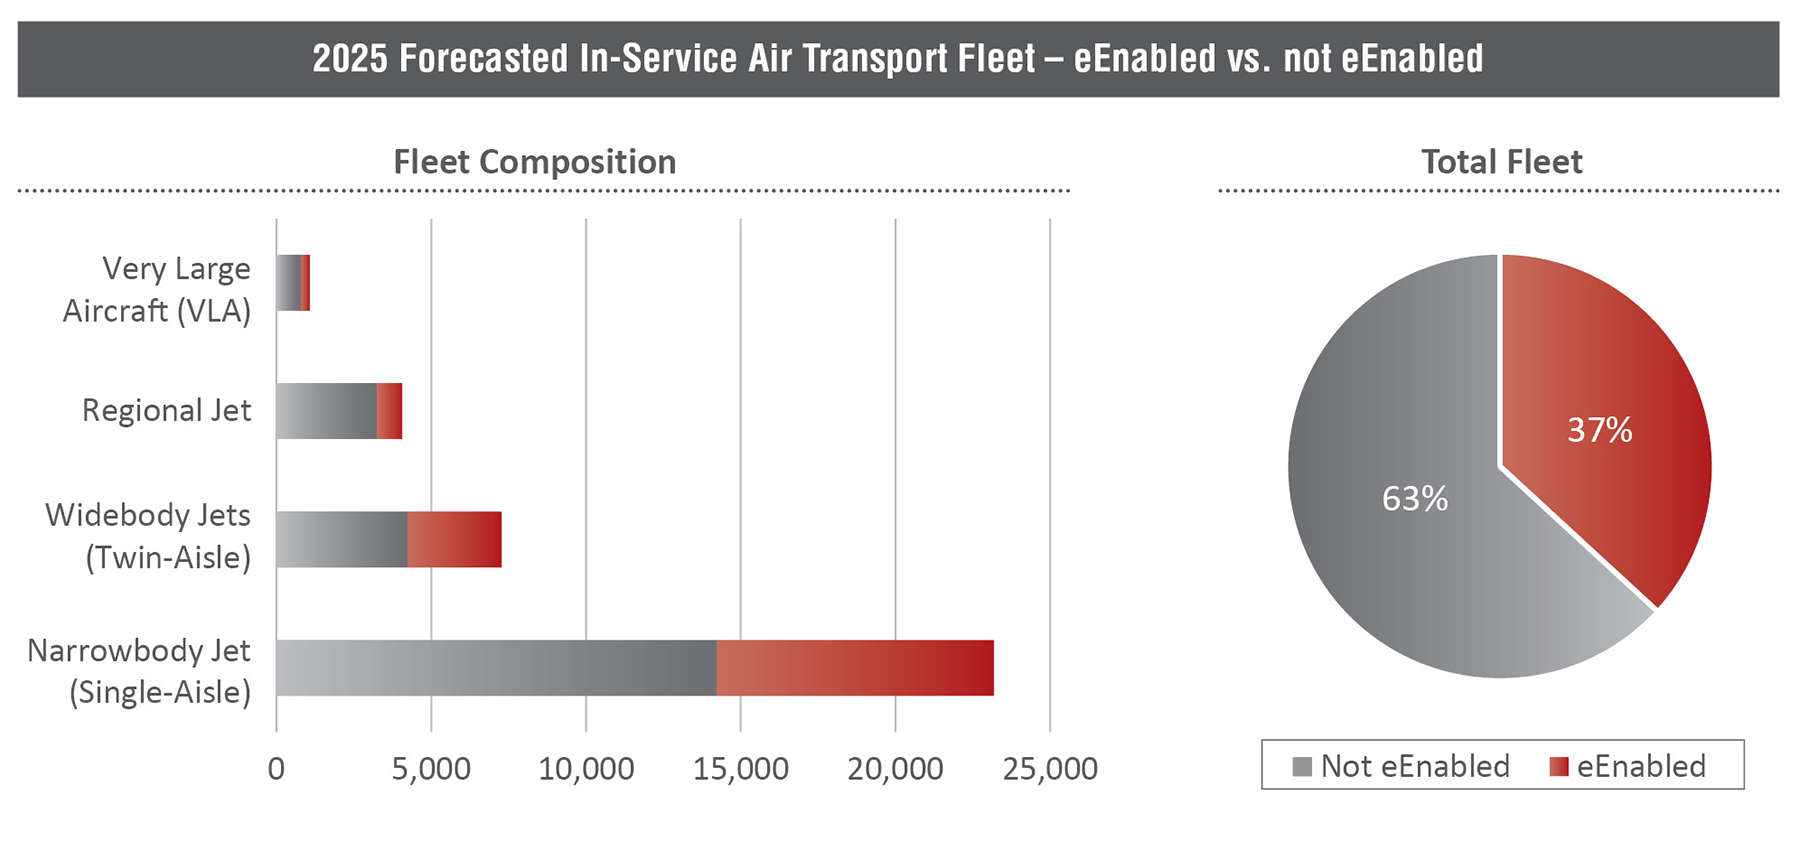 2025 Forecasted In-Service Air Transport Fleet